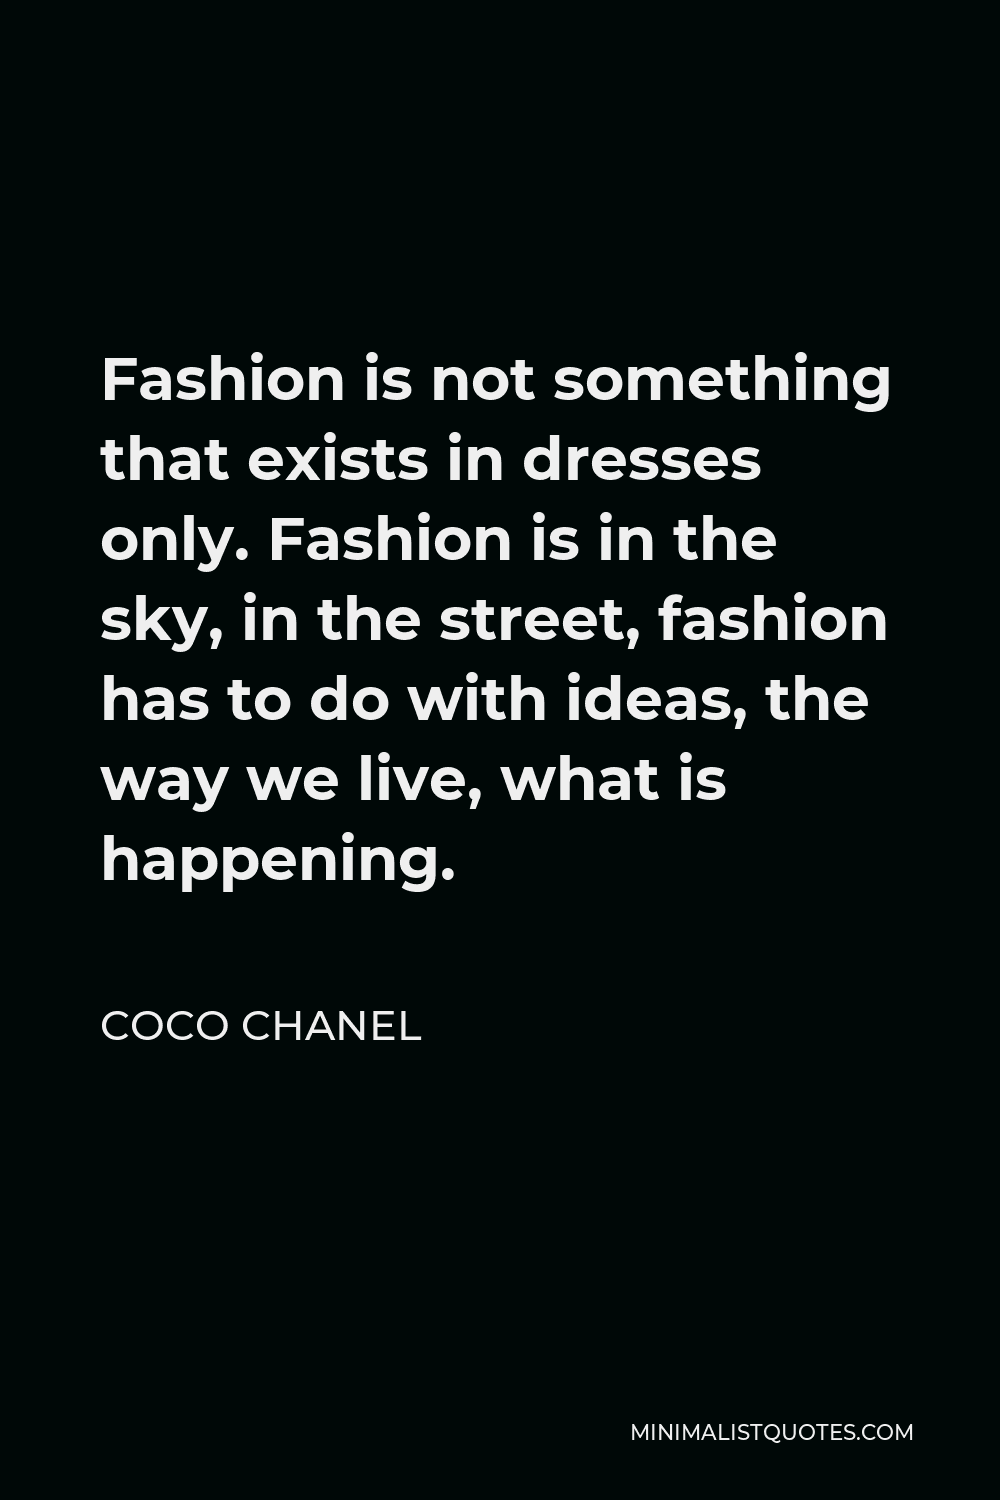 Quotes About Fashion Chanel QuotesGram